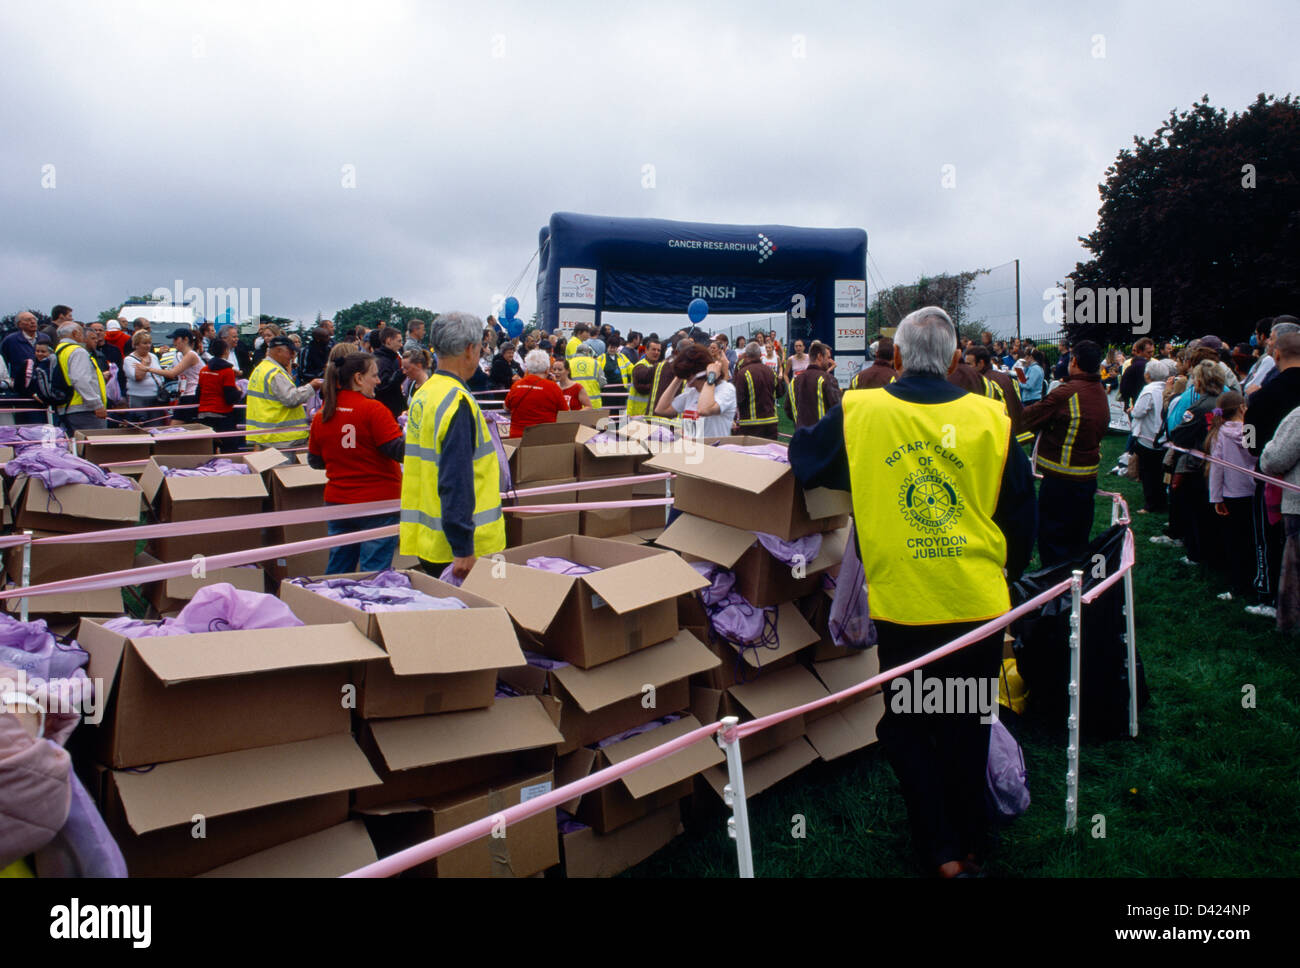 Rotary Club Giving Out Bags At The Finish Line Of Race For Life Raising Money For Cancer Research Stock Photo